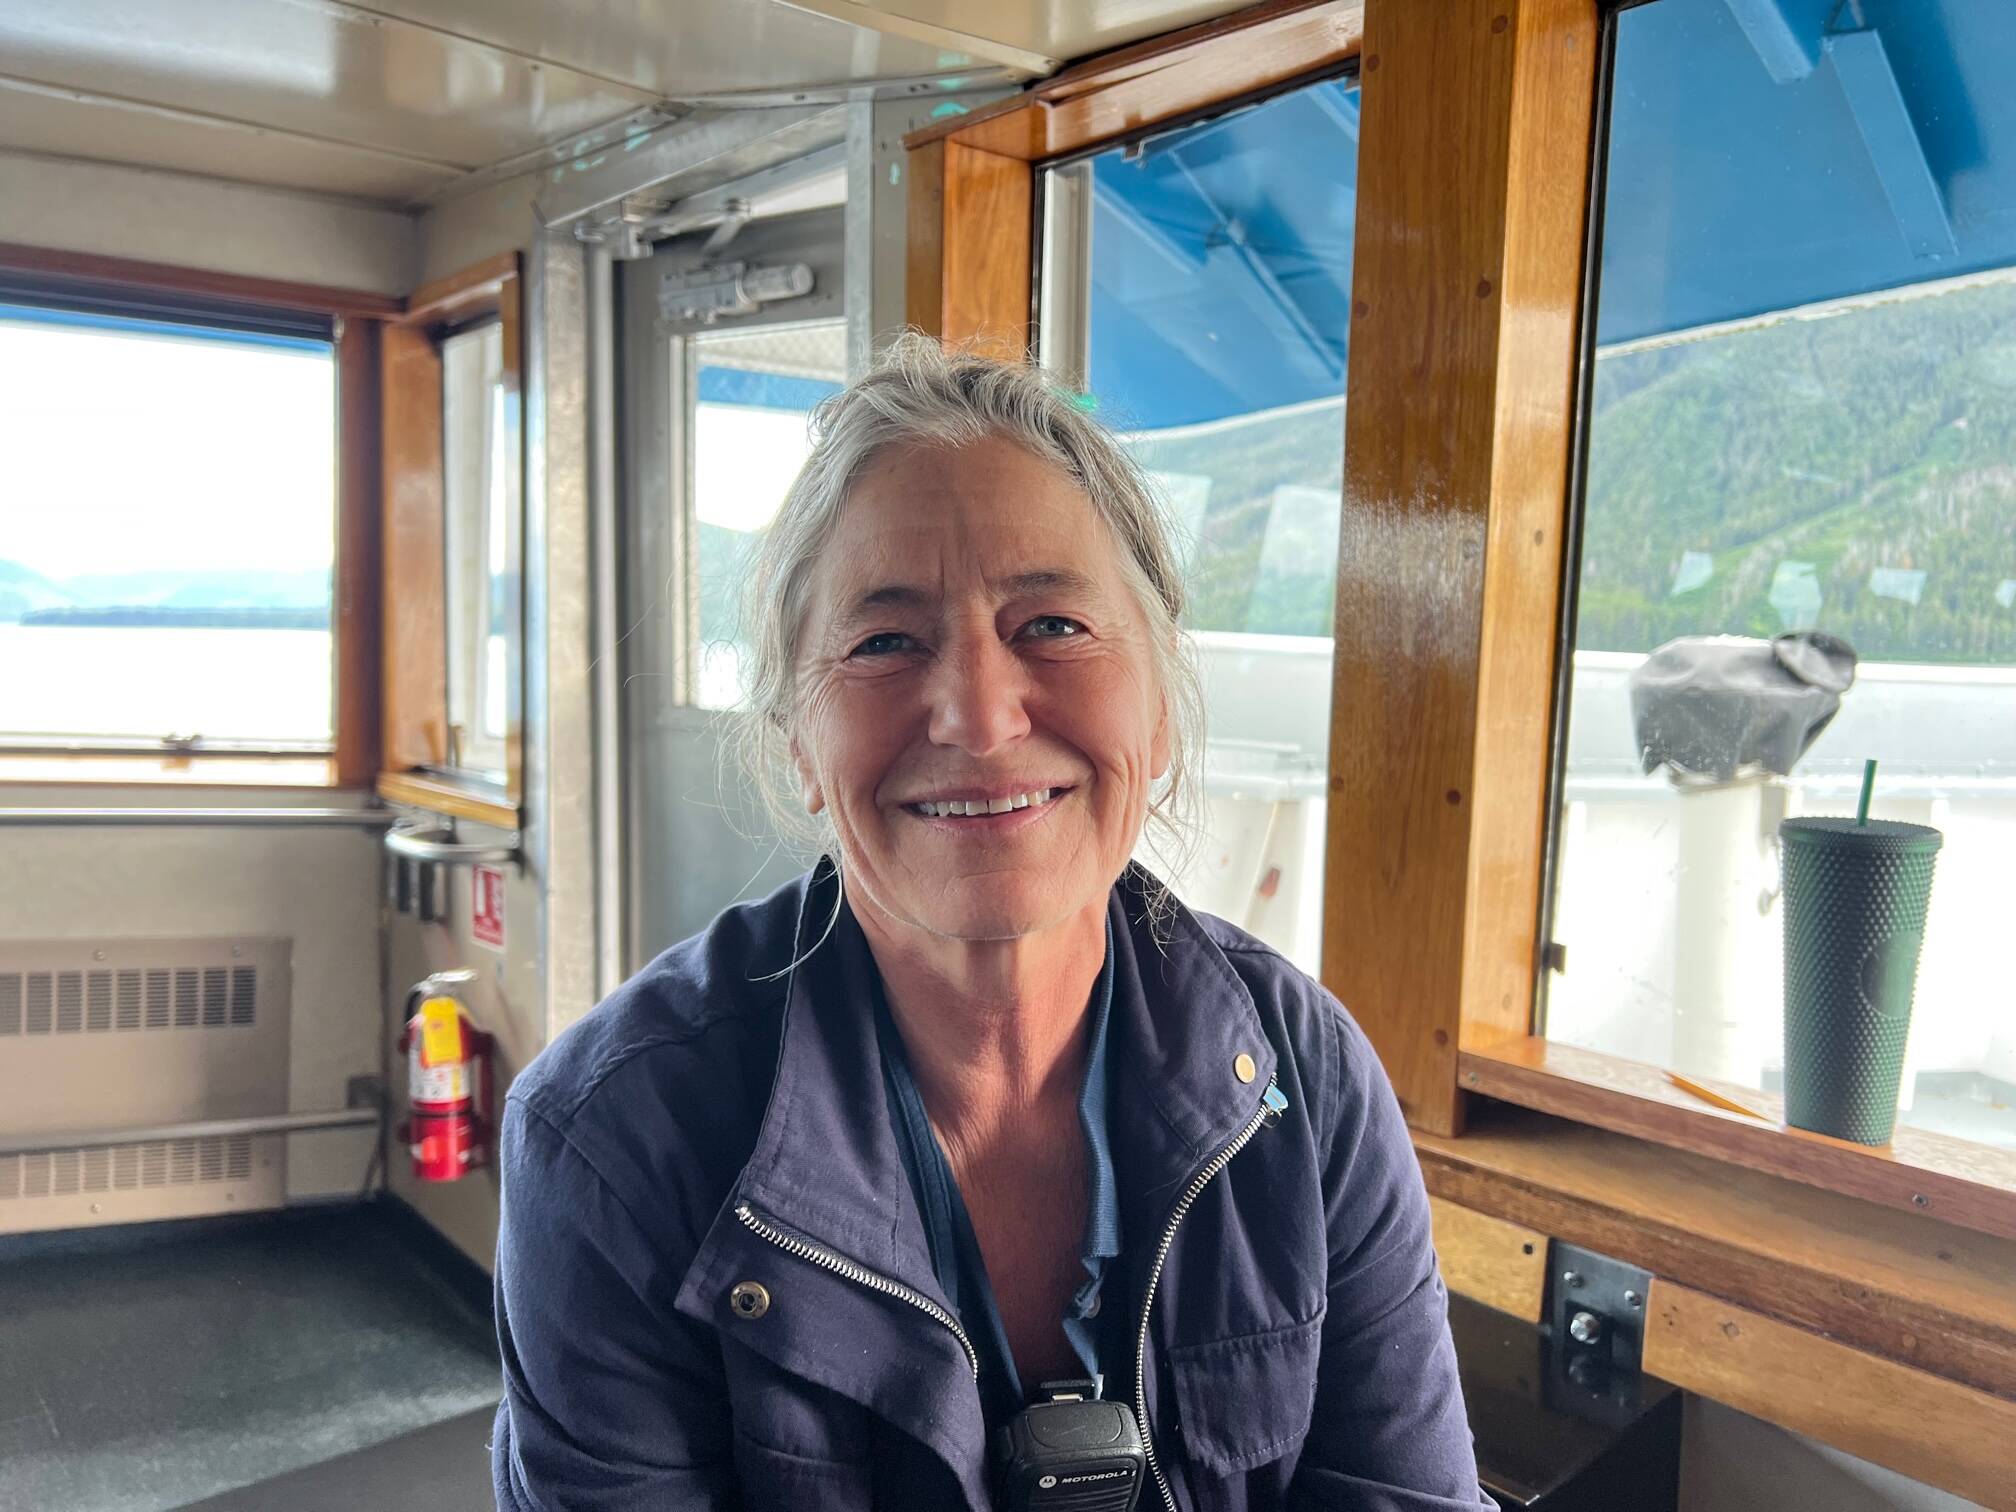 Ann Griswold called her job as an ordinary seaman “a pretty diverse position.” It includes assisting the bosun and other deck crew in loading and offloading vehicles in different ports, regularly taking a turn at the helm, and being a lookout on the bow when circumstances call for it. (Meredith Jordan / Juneau Empire)